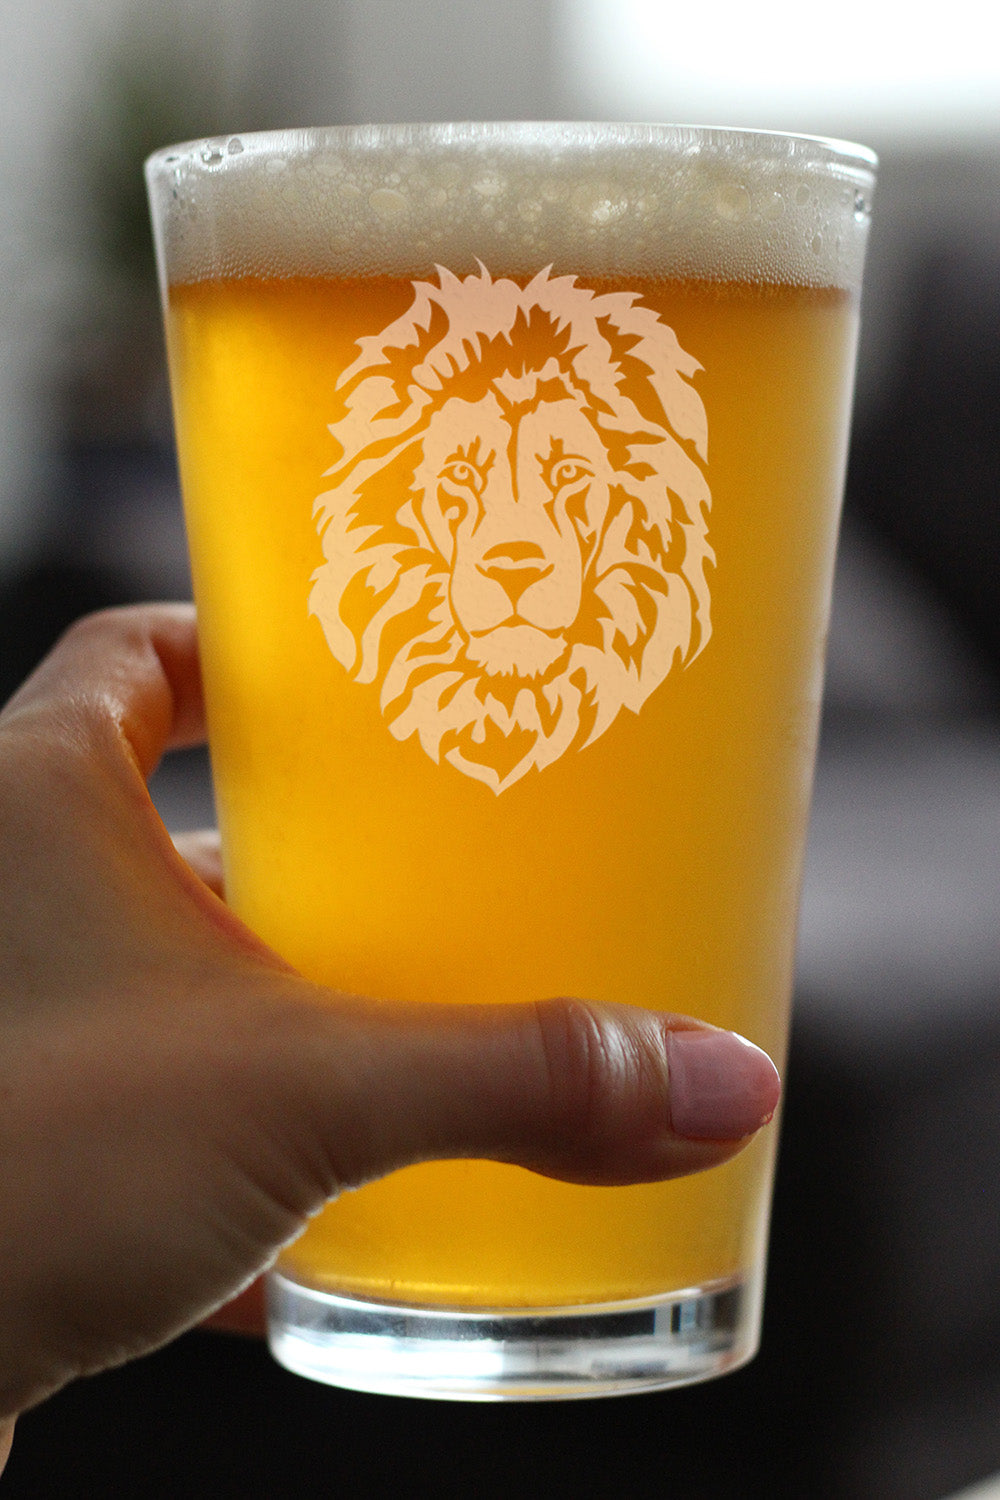 Lion Pint Glass for Beer - Fun Safari Themed Decor and Gifts for Lovers of African Wild Animals - 16 Oz Glasses